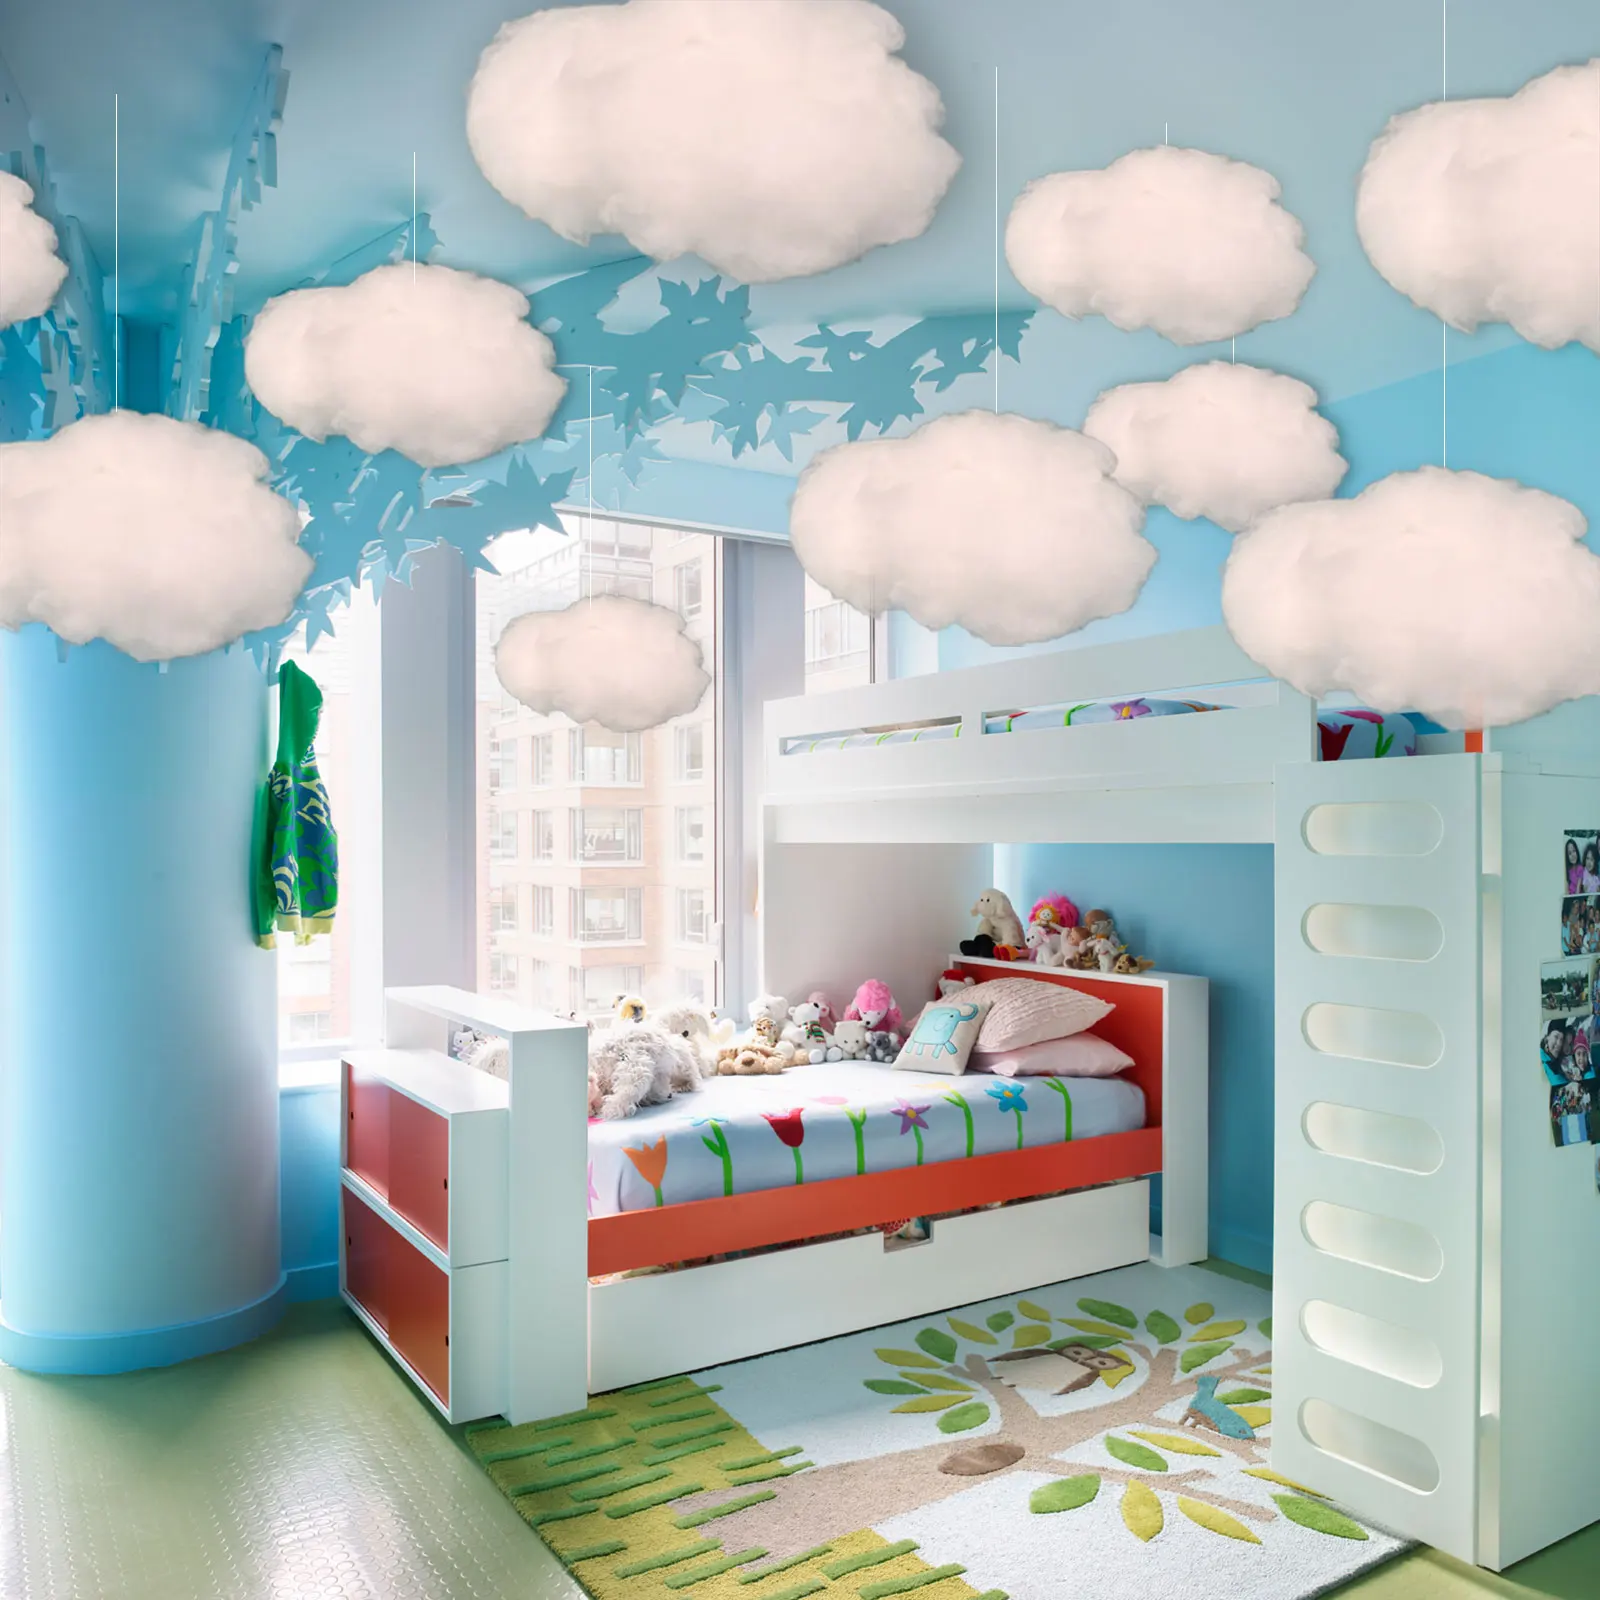 14 Pcs Artificial Cloud Props Cloud Ceiling Decor Clouds for Decoration  with Paper Raindrop Decorations for DIY Decorative Hanging Ornament Home  Wall